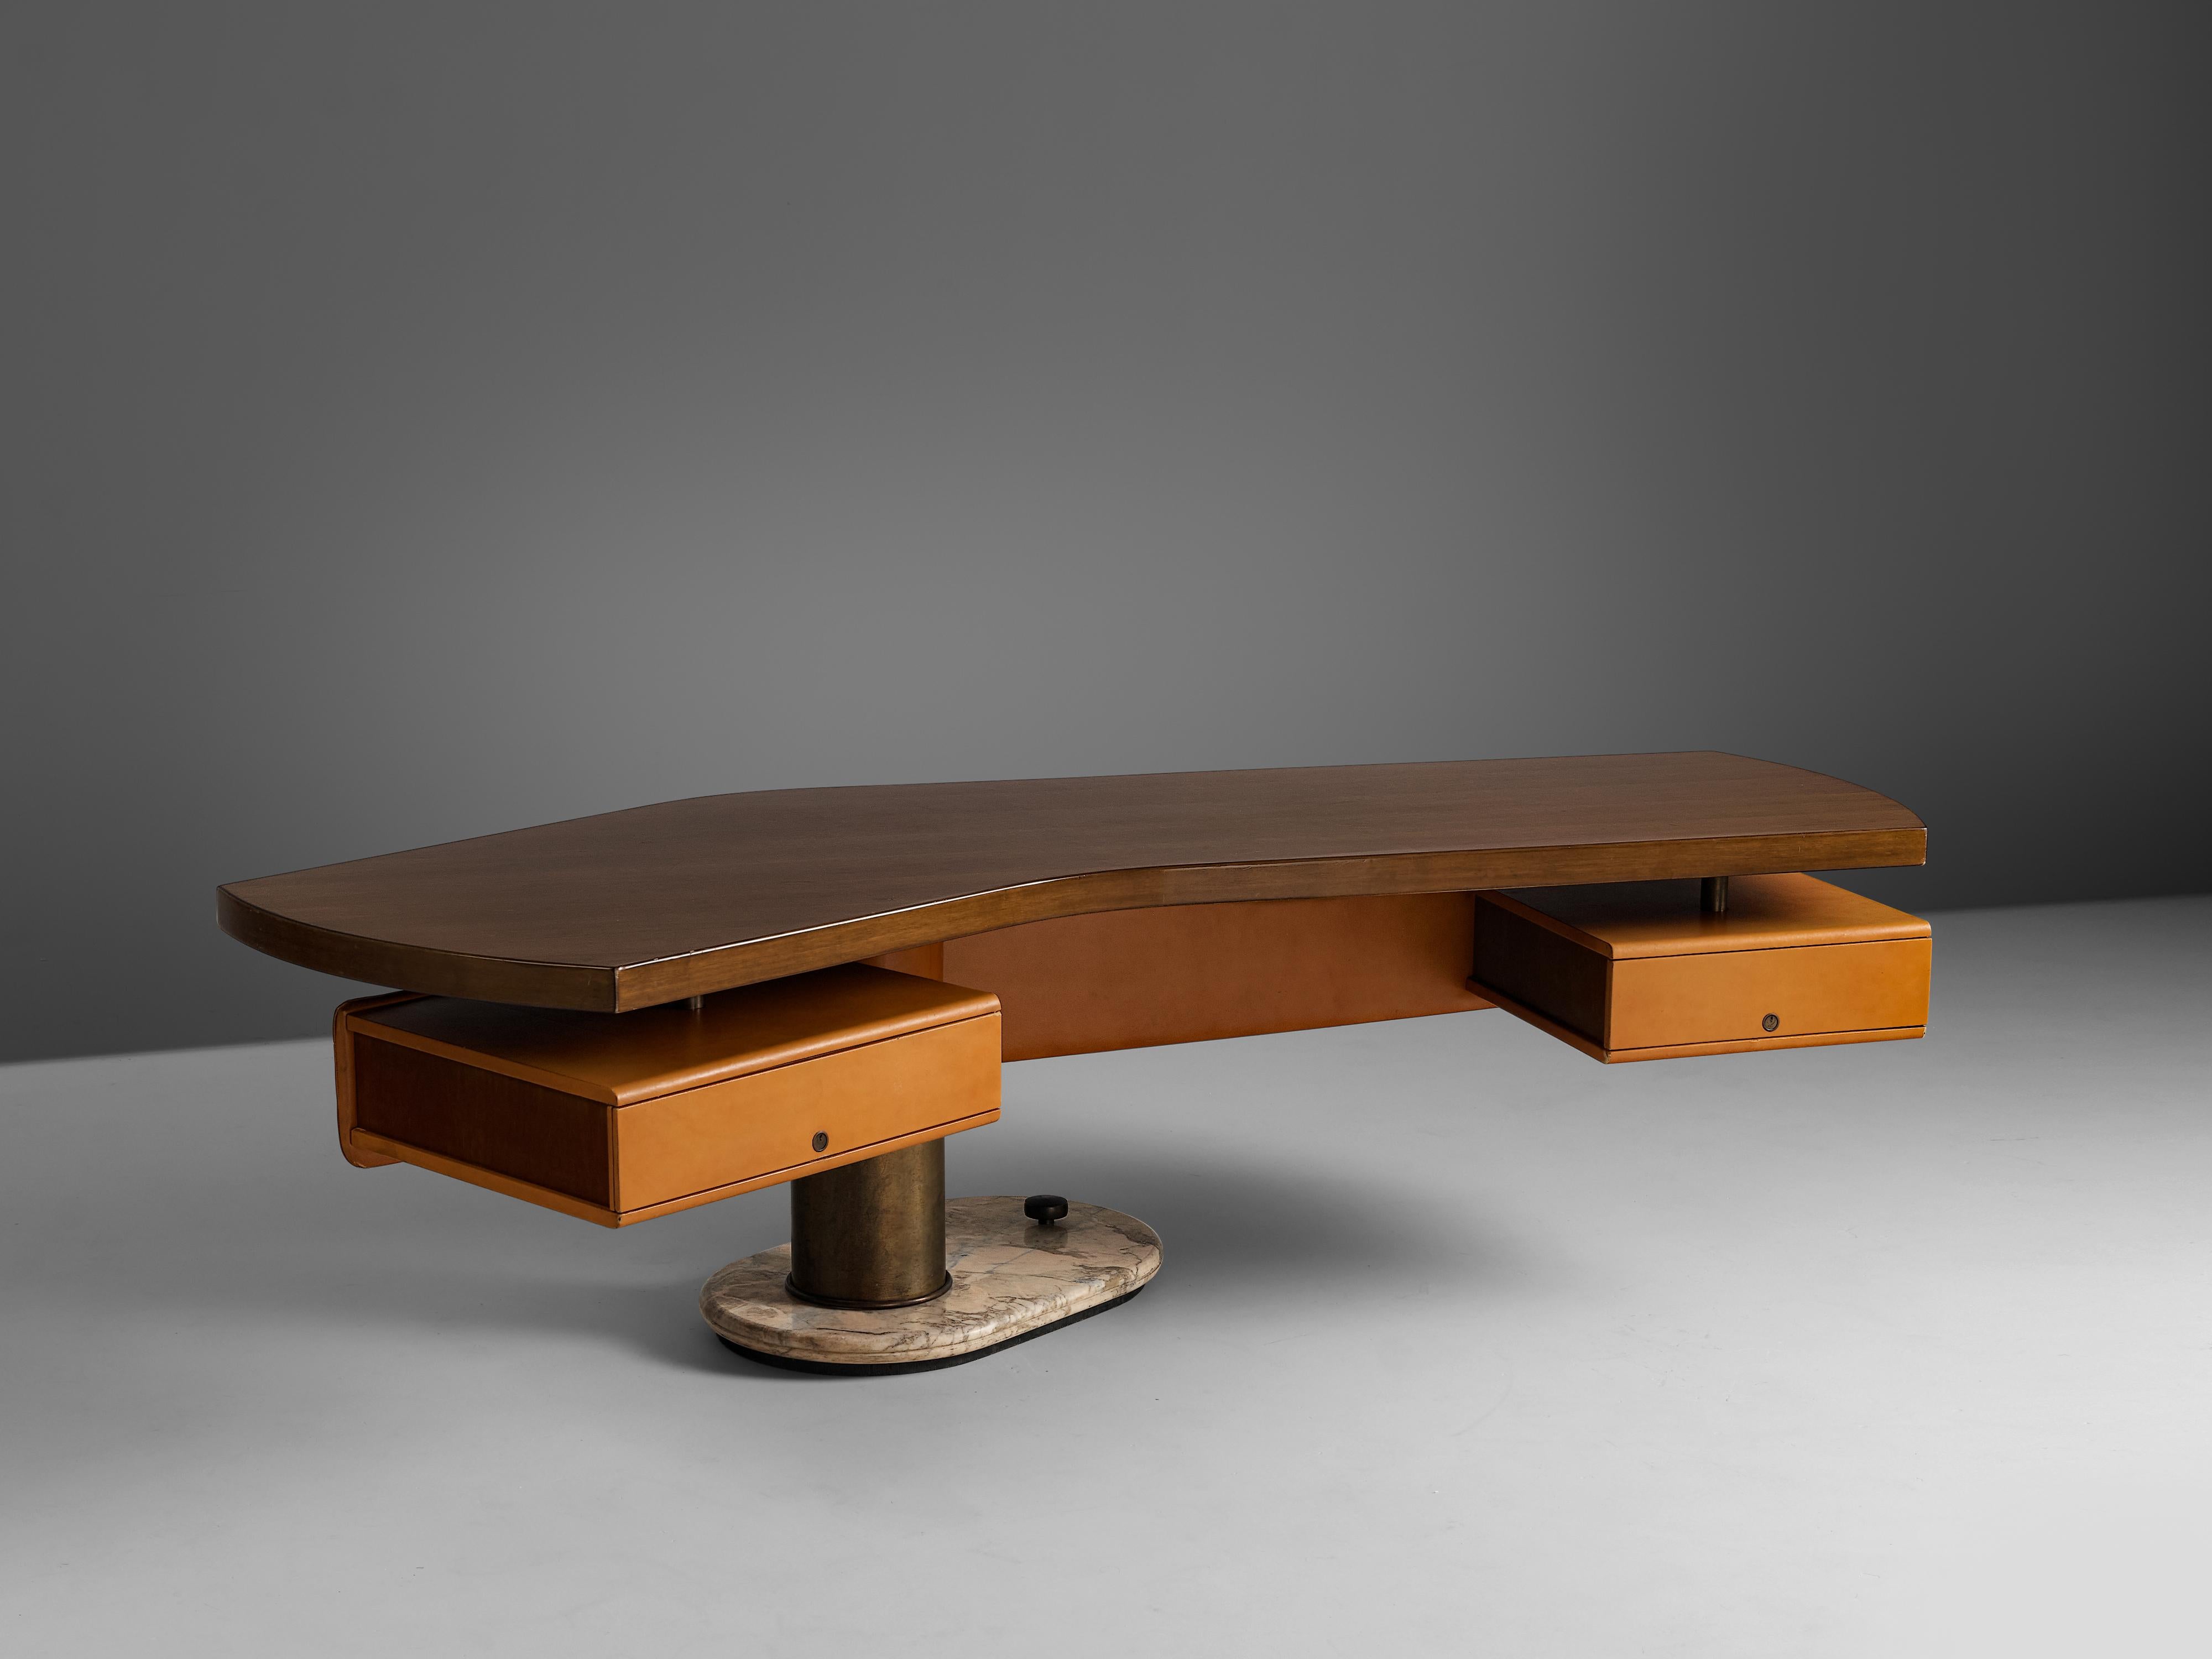 Stefano Mastuzzi, freestanding desk 'Zero', walnut, metal and marble, Italy, 1971-1972

This large, freestanding table with remarkable design was manufactured by Stefano Mastuzzi in 1972. The boomerang shaped tabletop is held by one pedestal leg